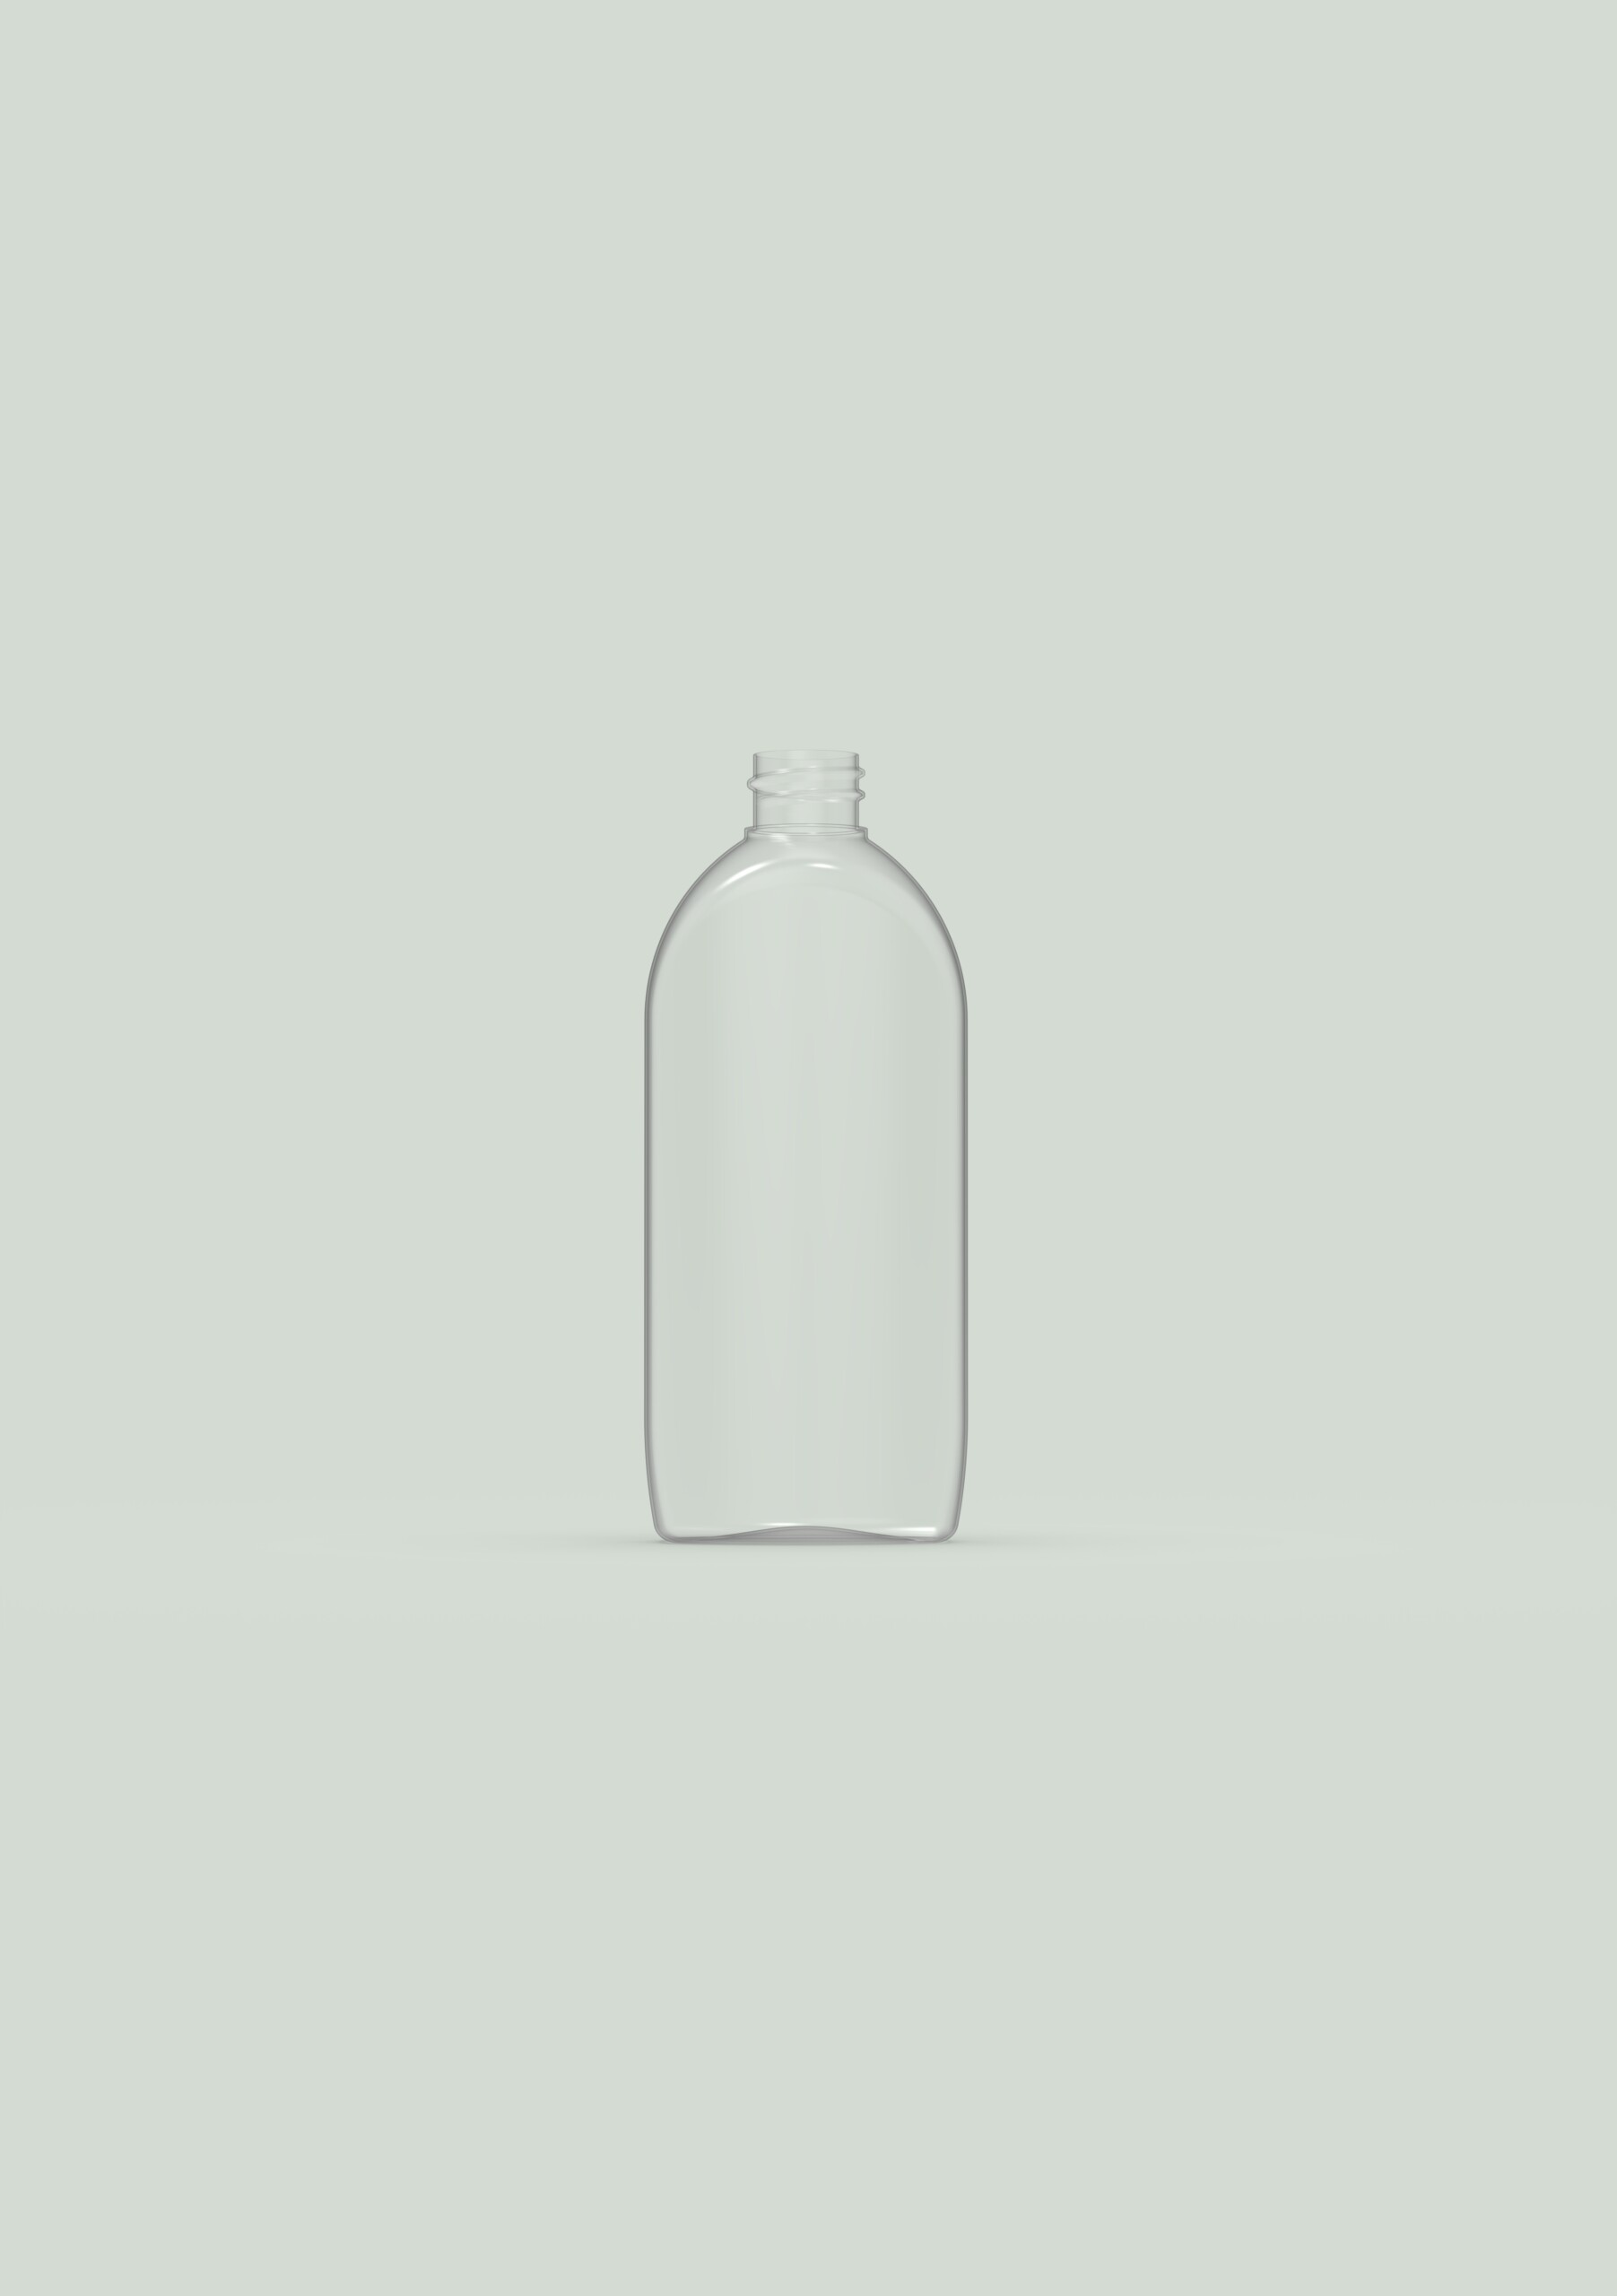 PET Oval bottle 200ml.956 scaled News